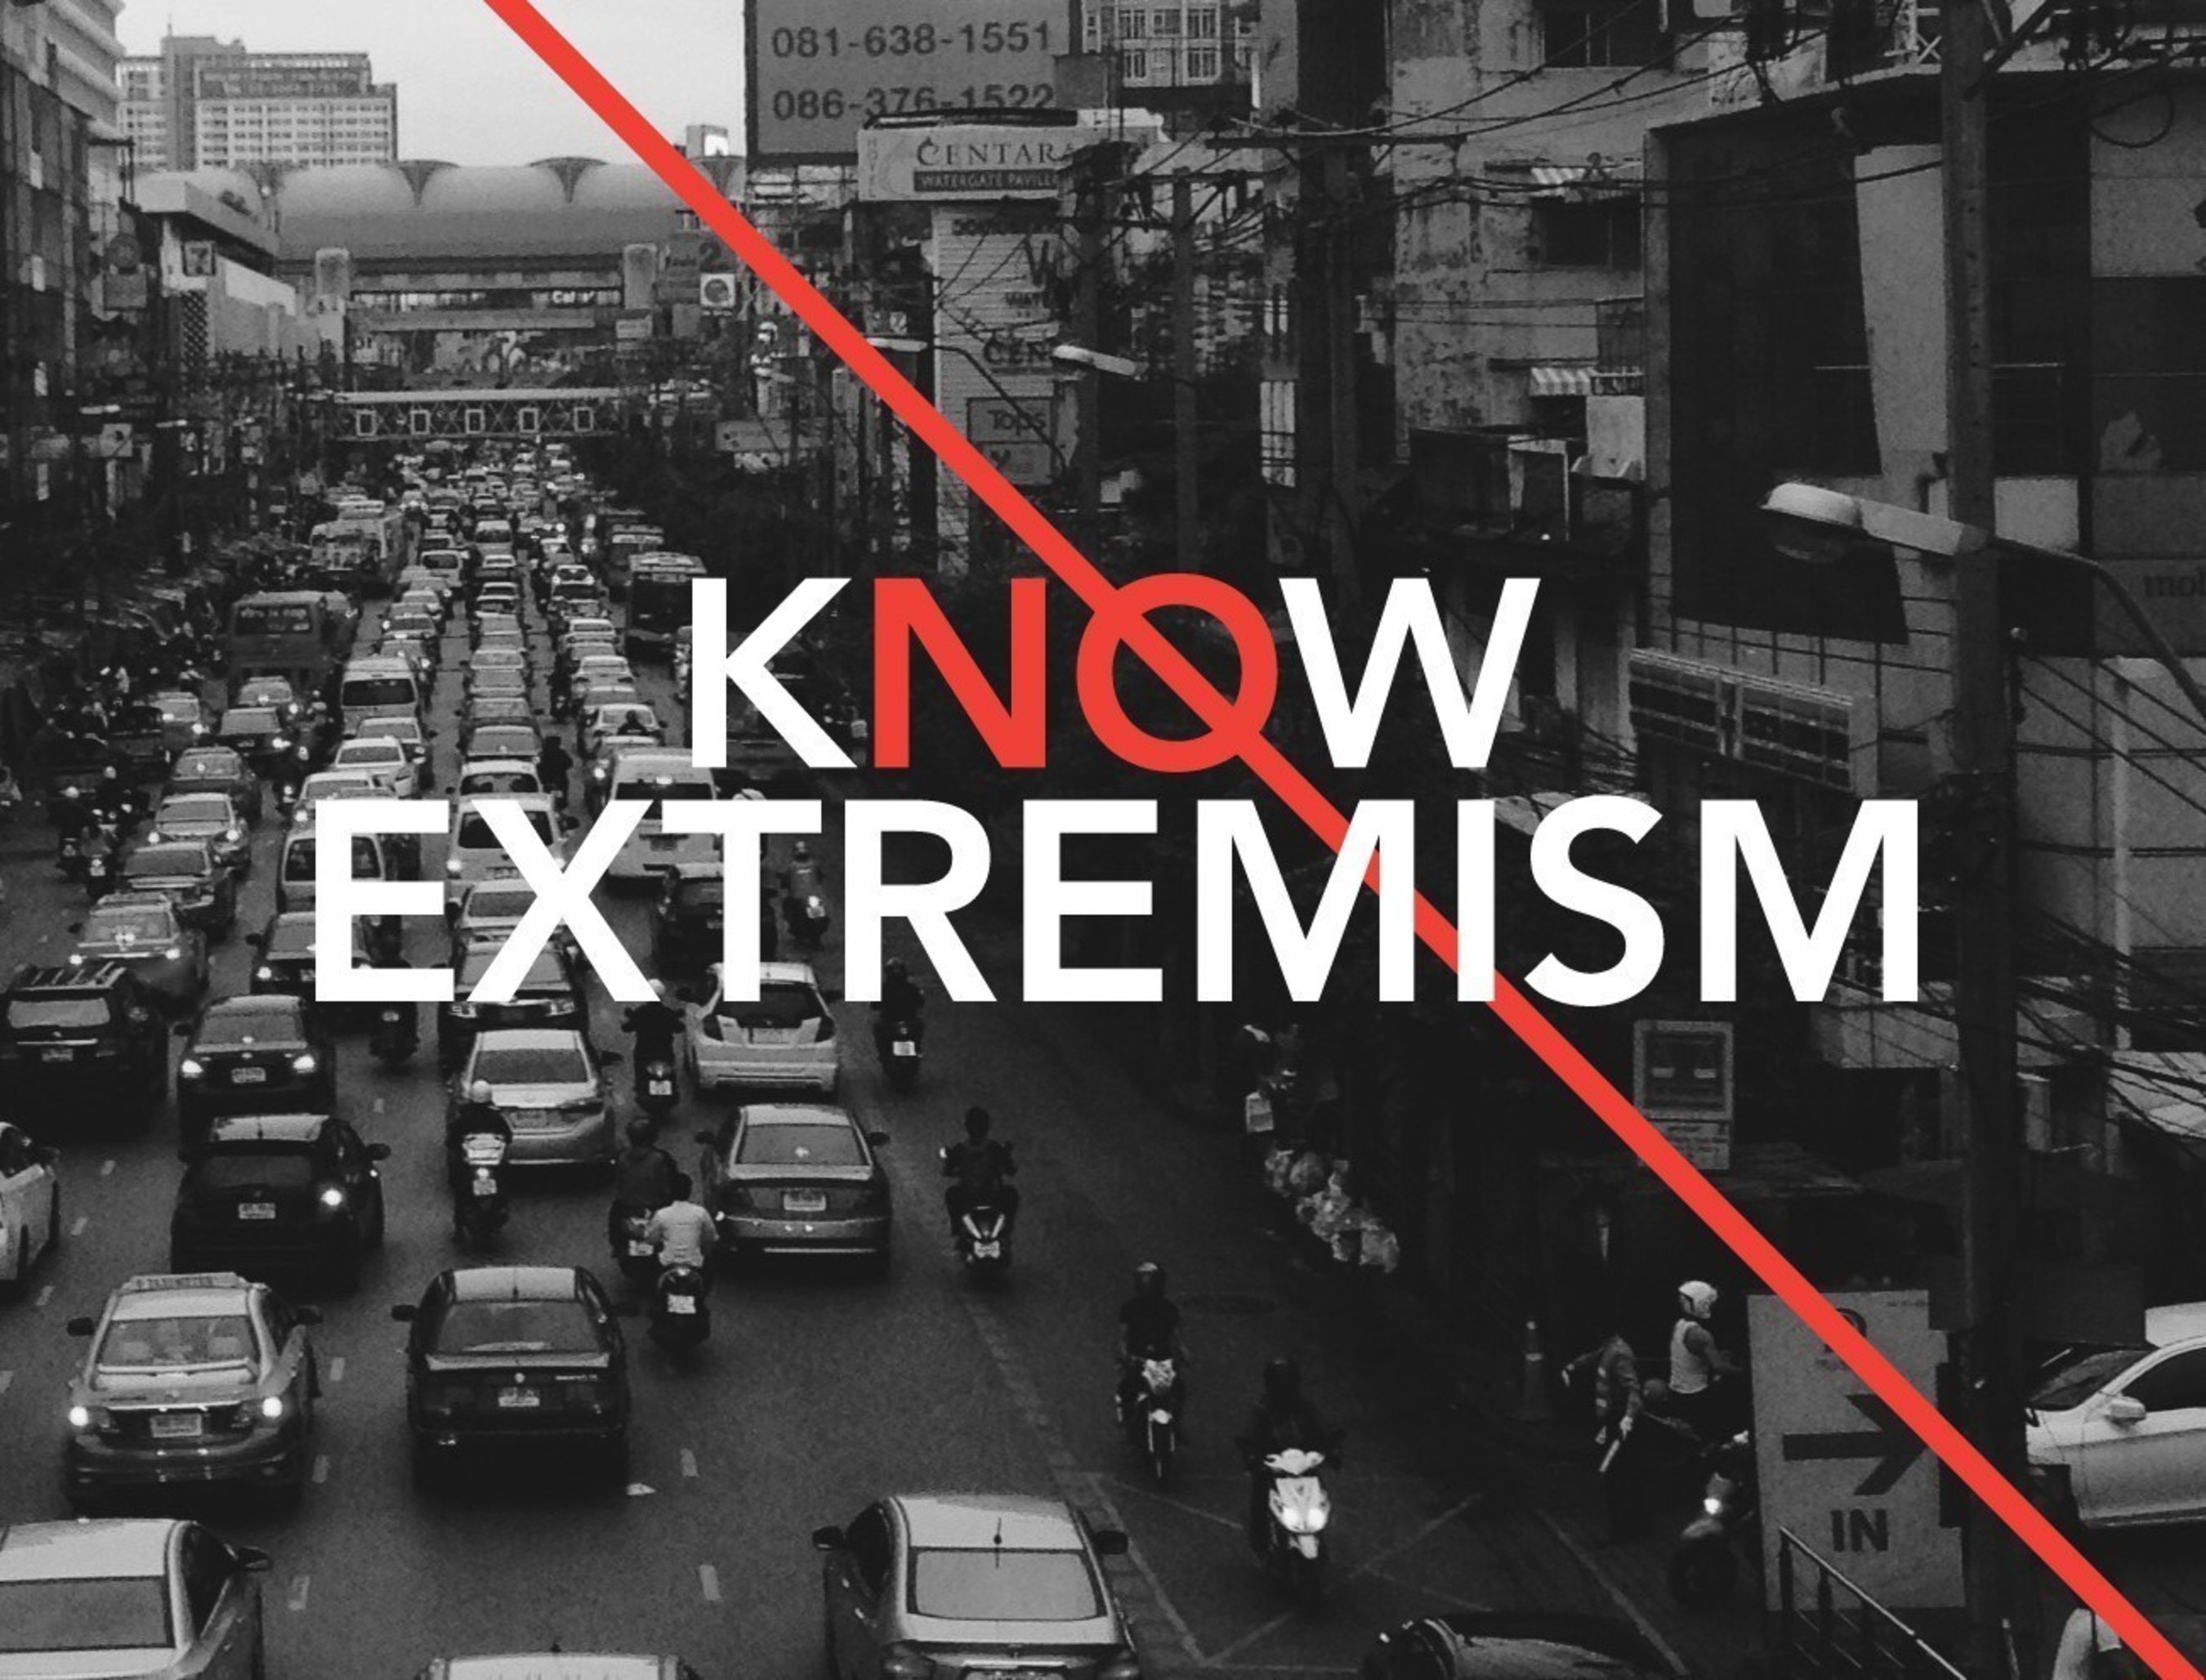 University of New Mexico's KNOW Extremism Campaign